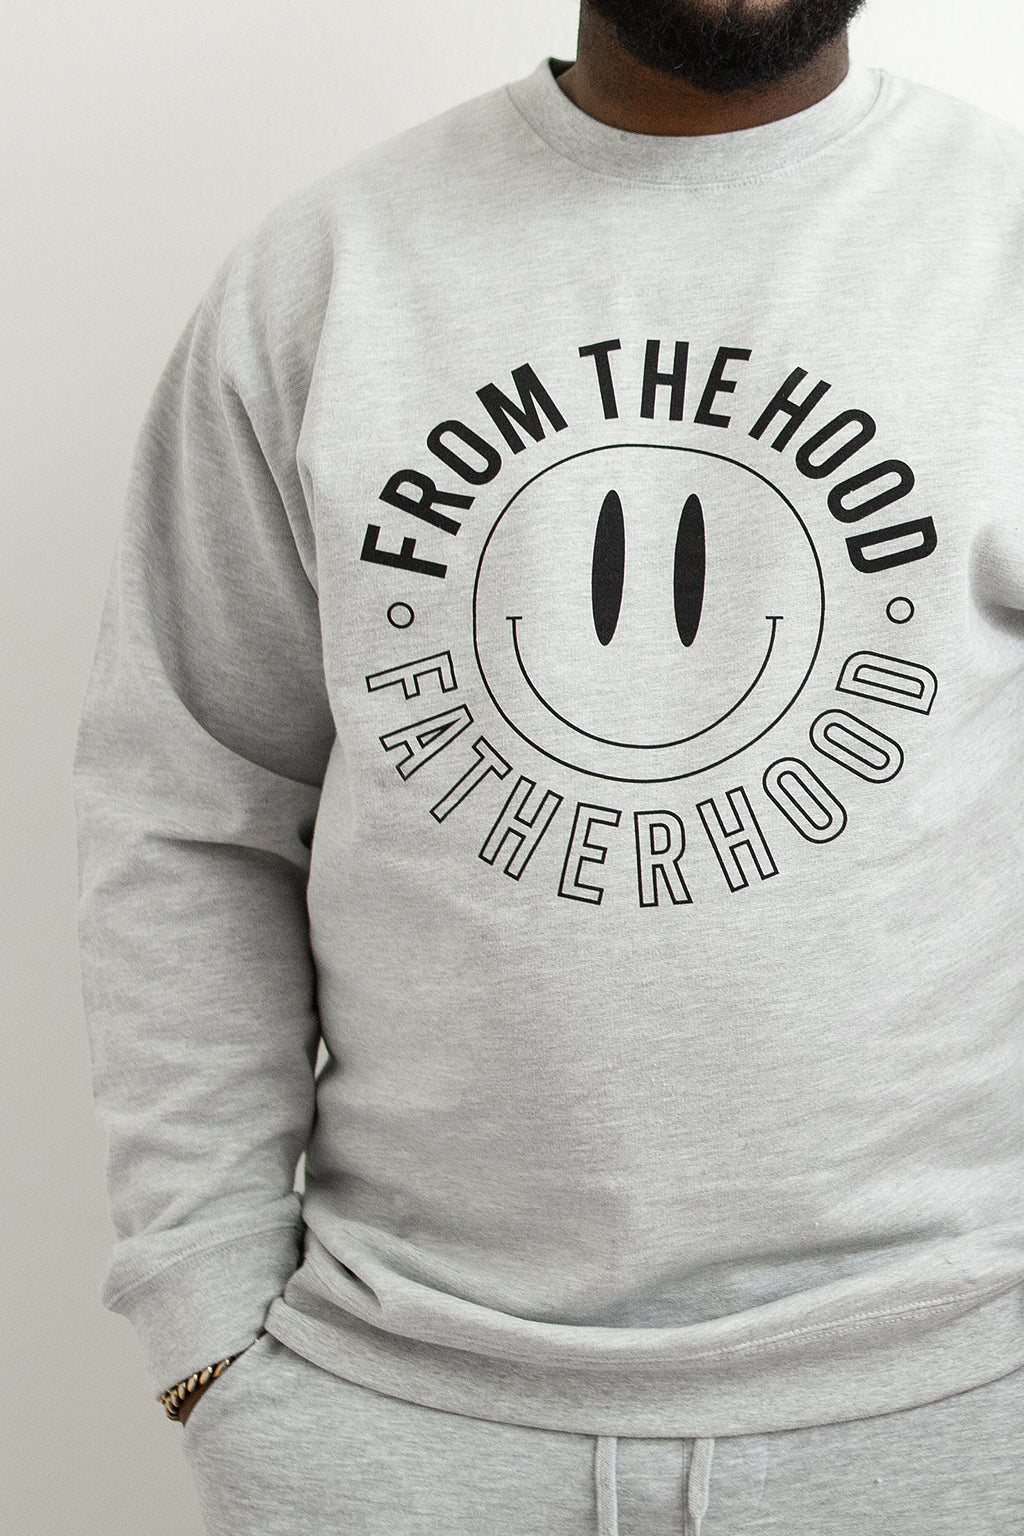 Load image into Gallery viewer, From The Hood, Fatherhood Crewneck
